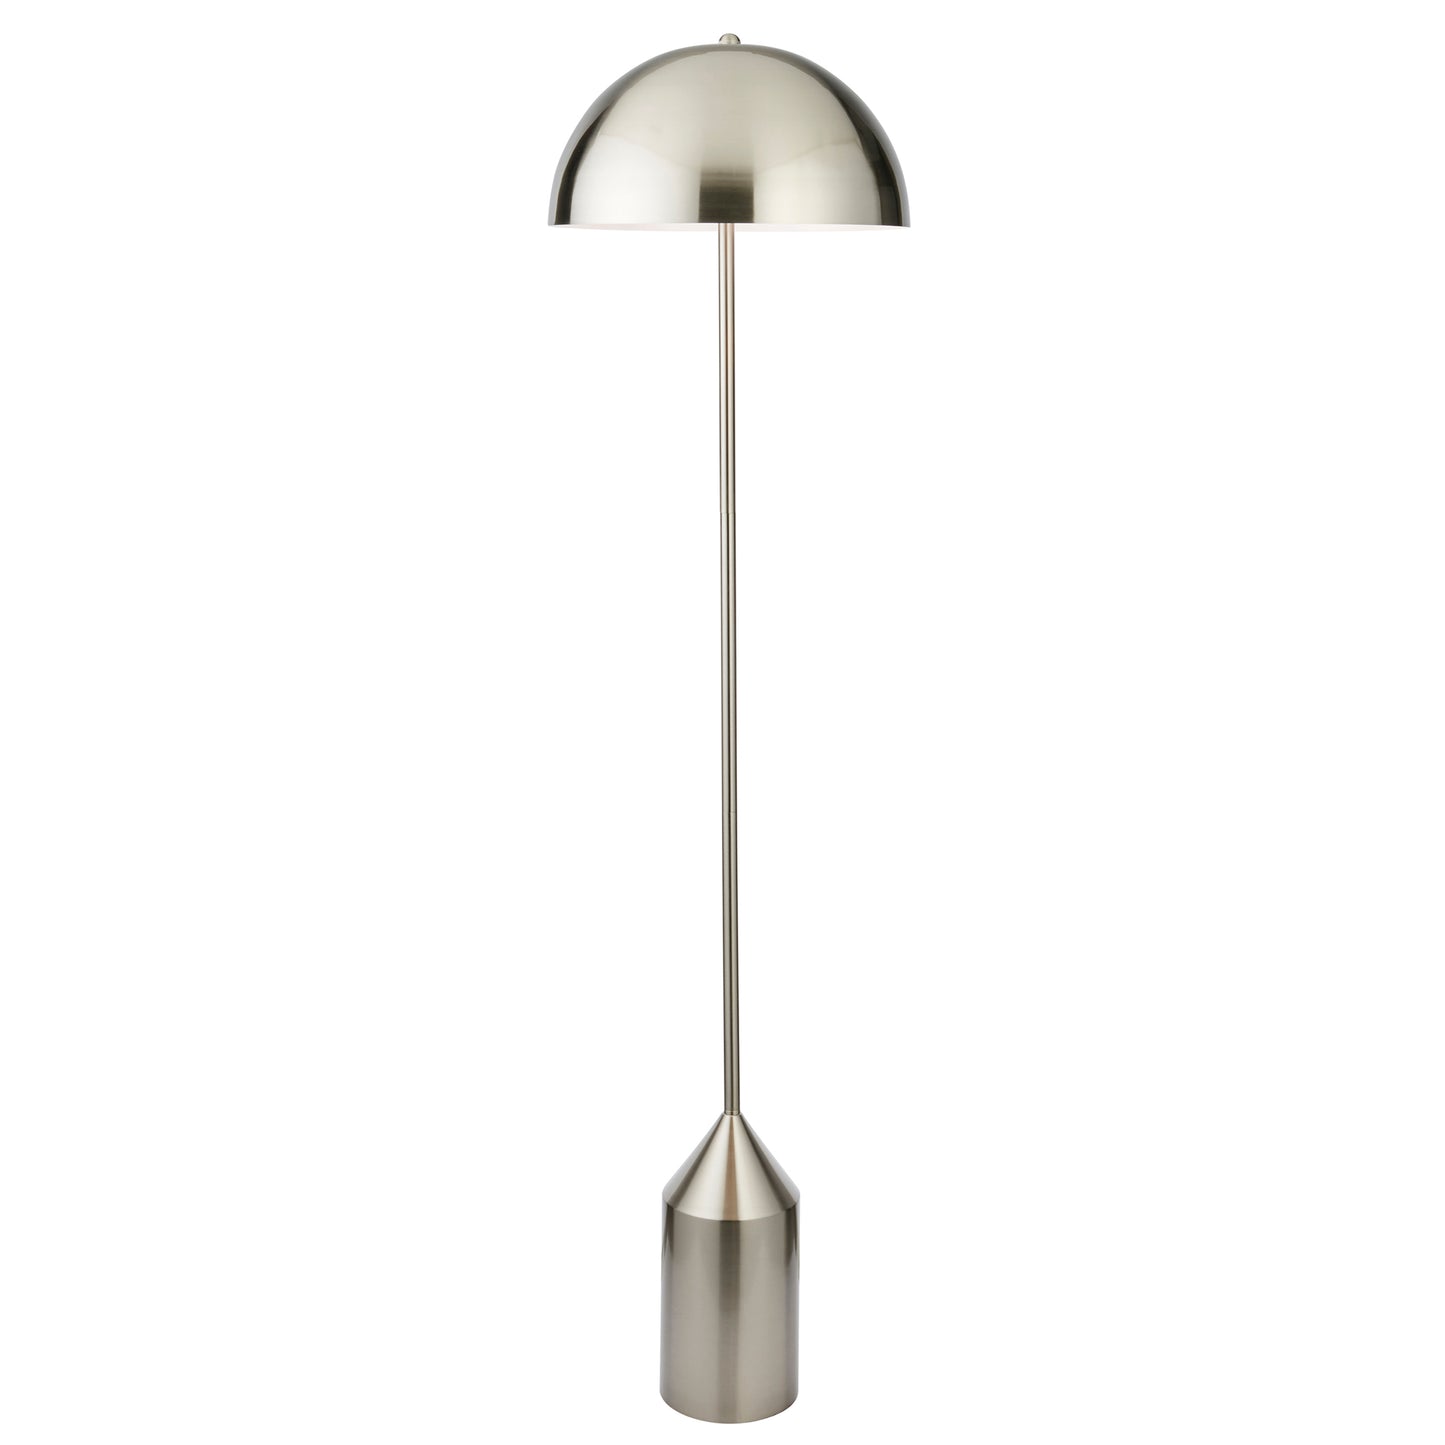 A Nova Floor Lamp with a metal base for interior decor from Kikiathome.co.uk.